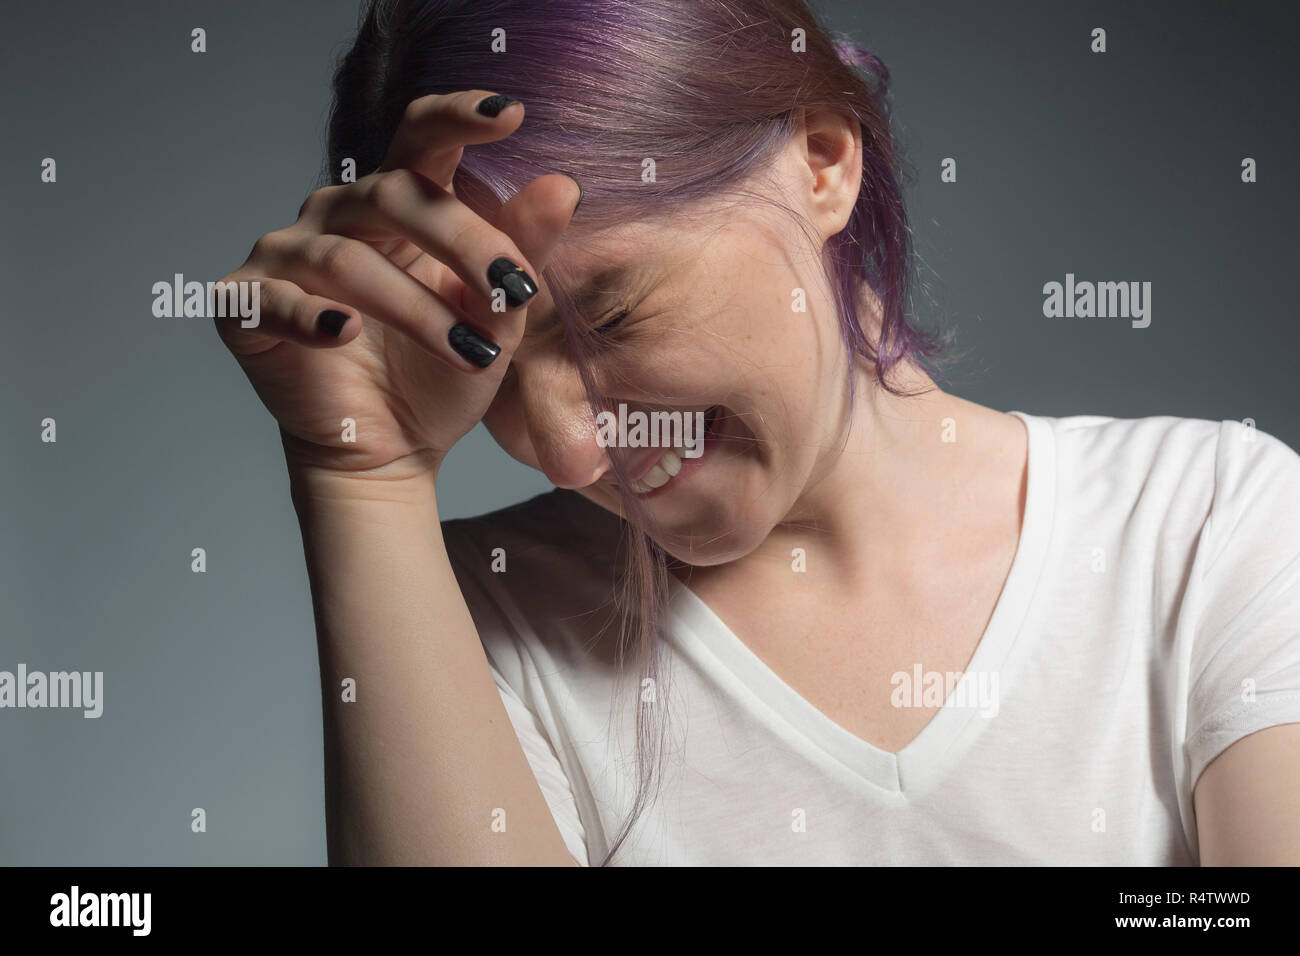 Young woman with dyed hair looking away and wincing against gray background Stock Photo